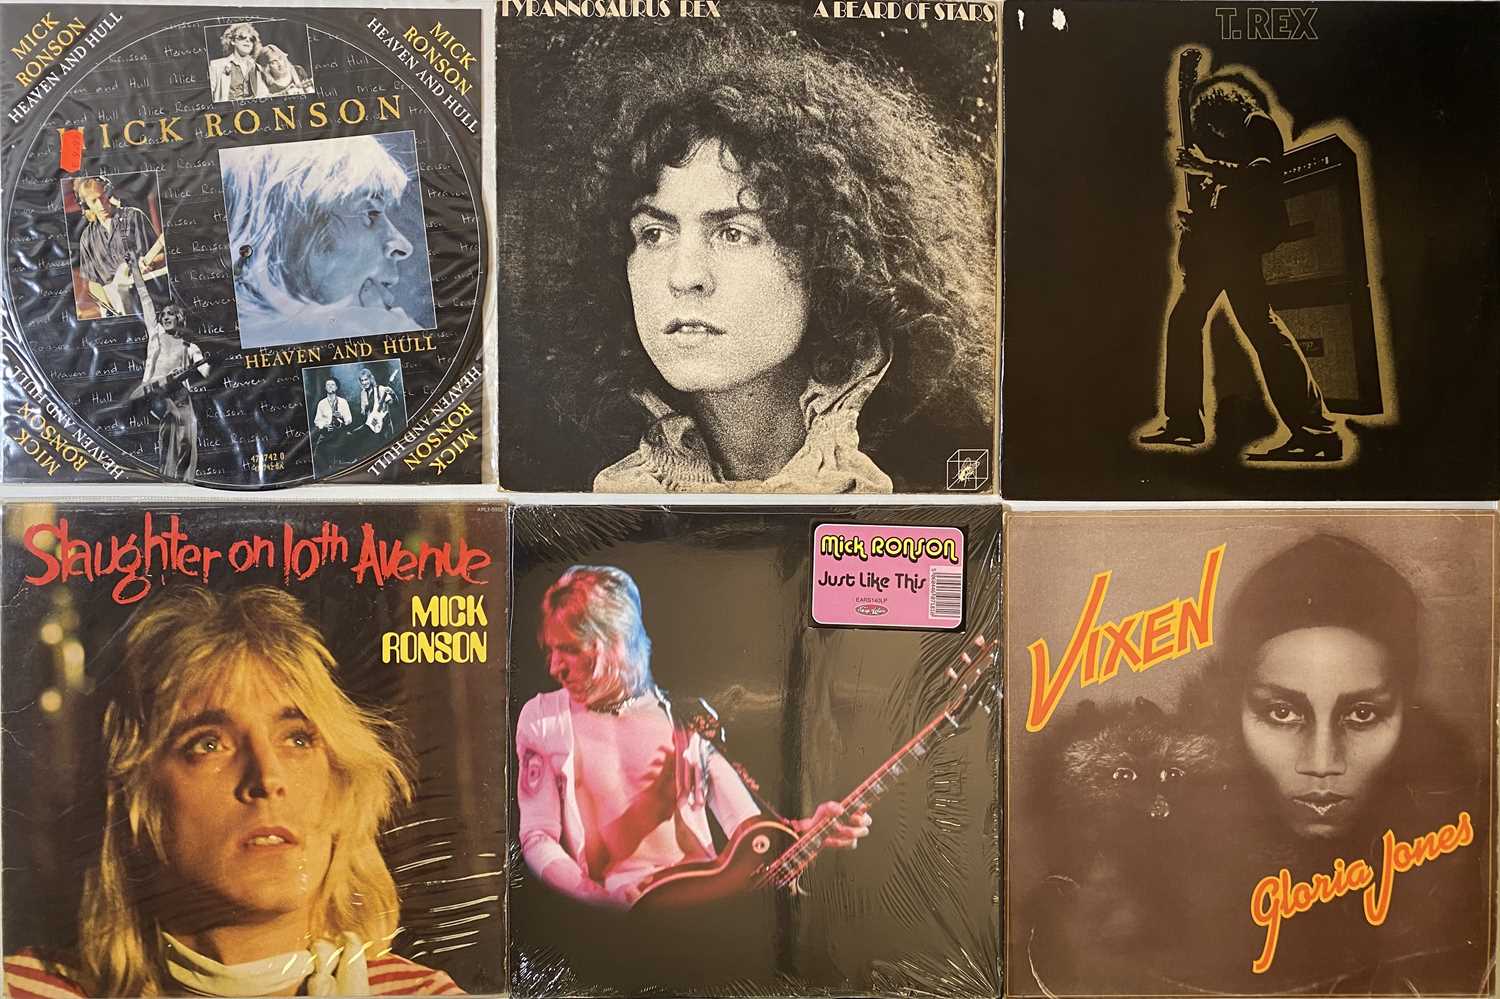 Lot 345 - GLAM - LP COLLECTION.